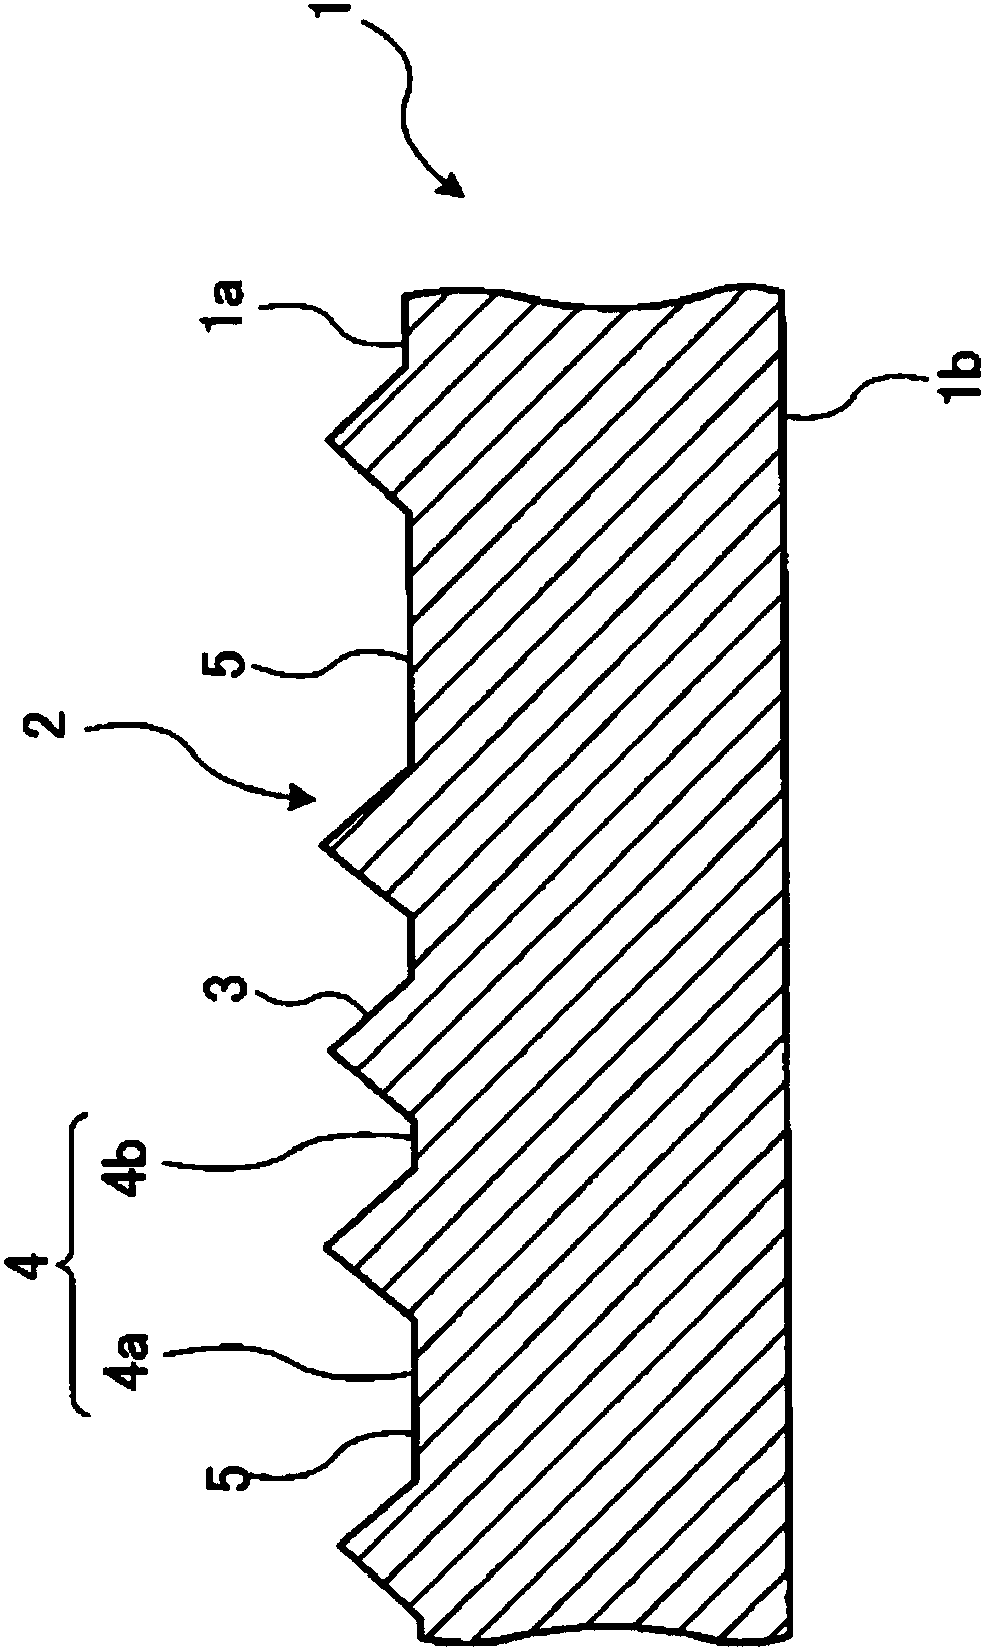 Optical substrate, substrate for semiconductor light emitting element, and semiconductor light emitting element